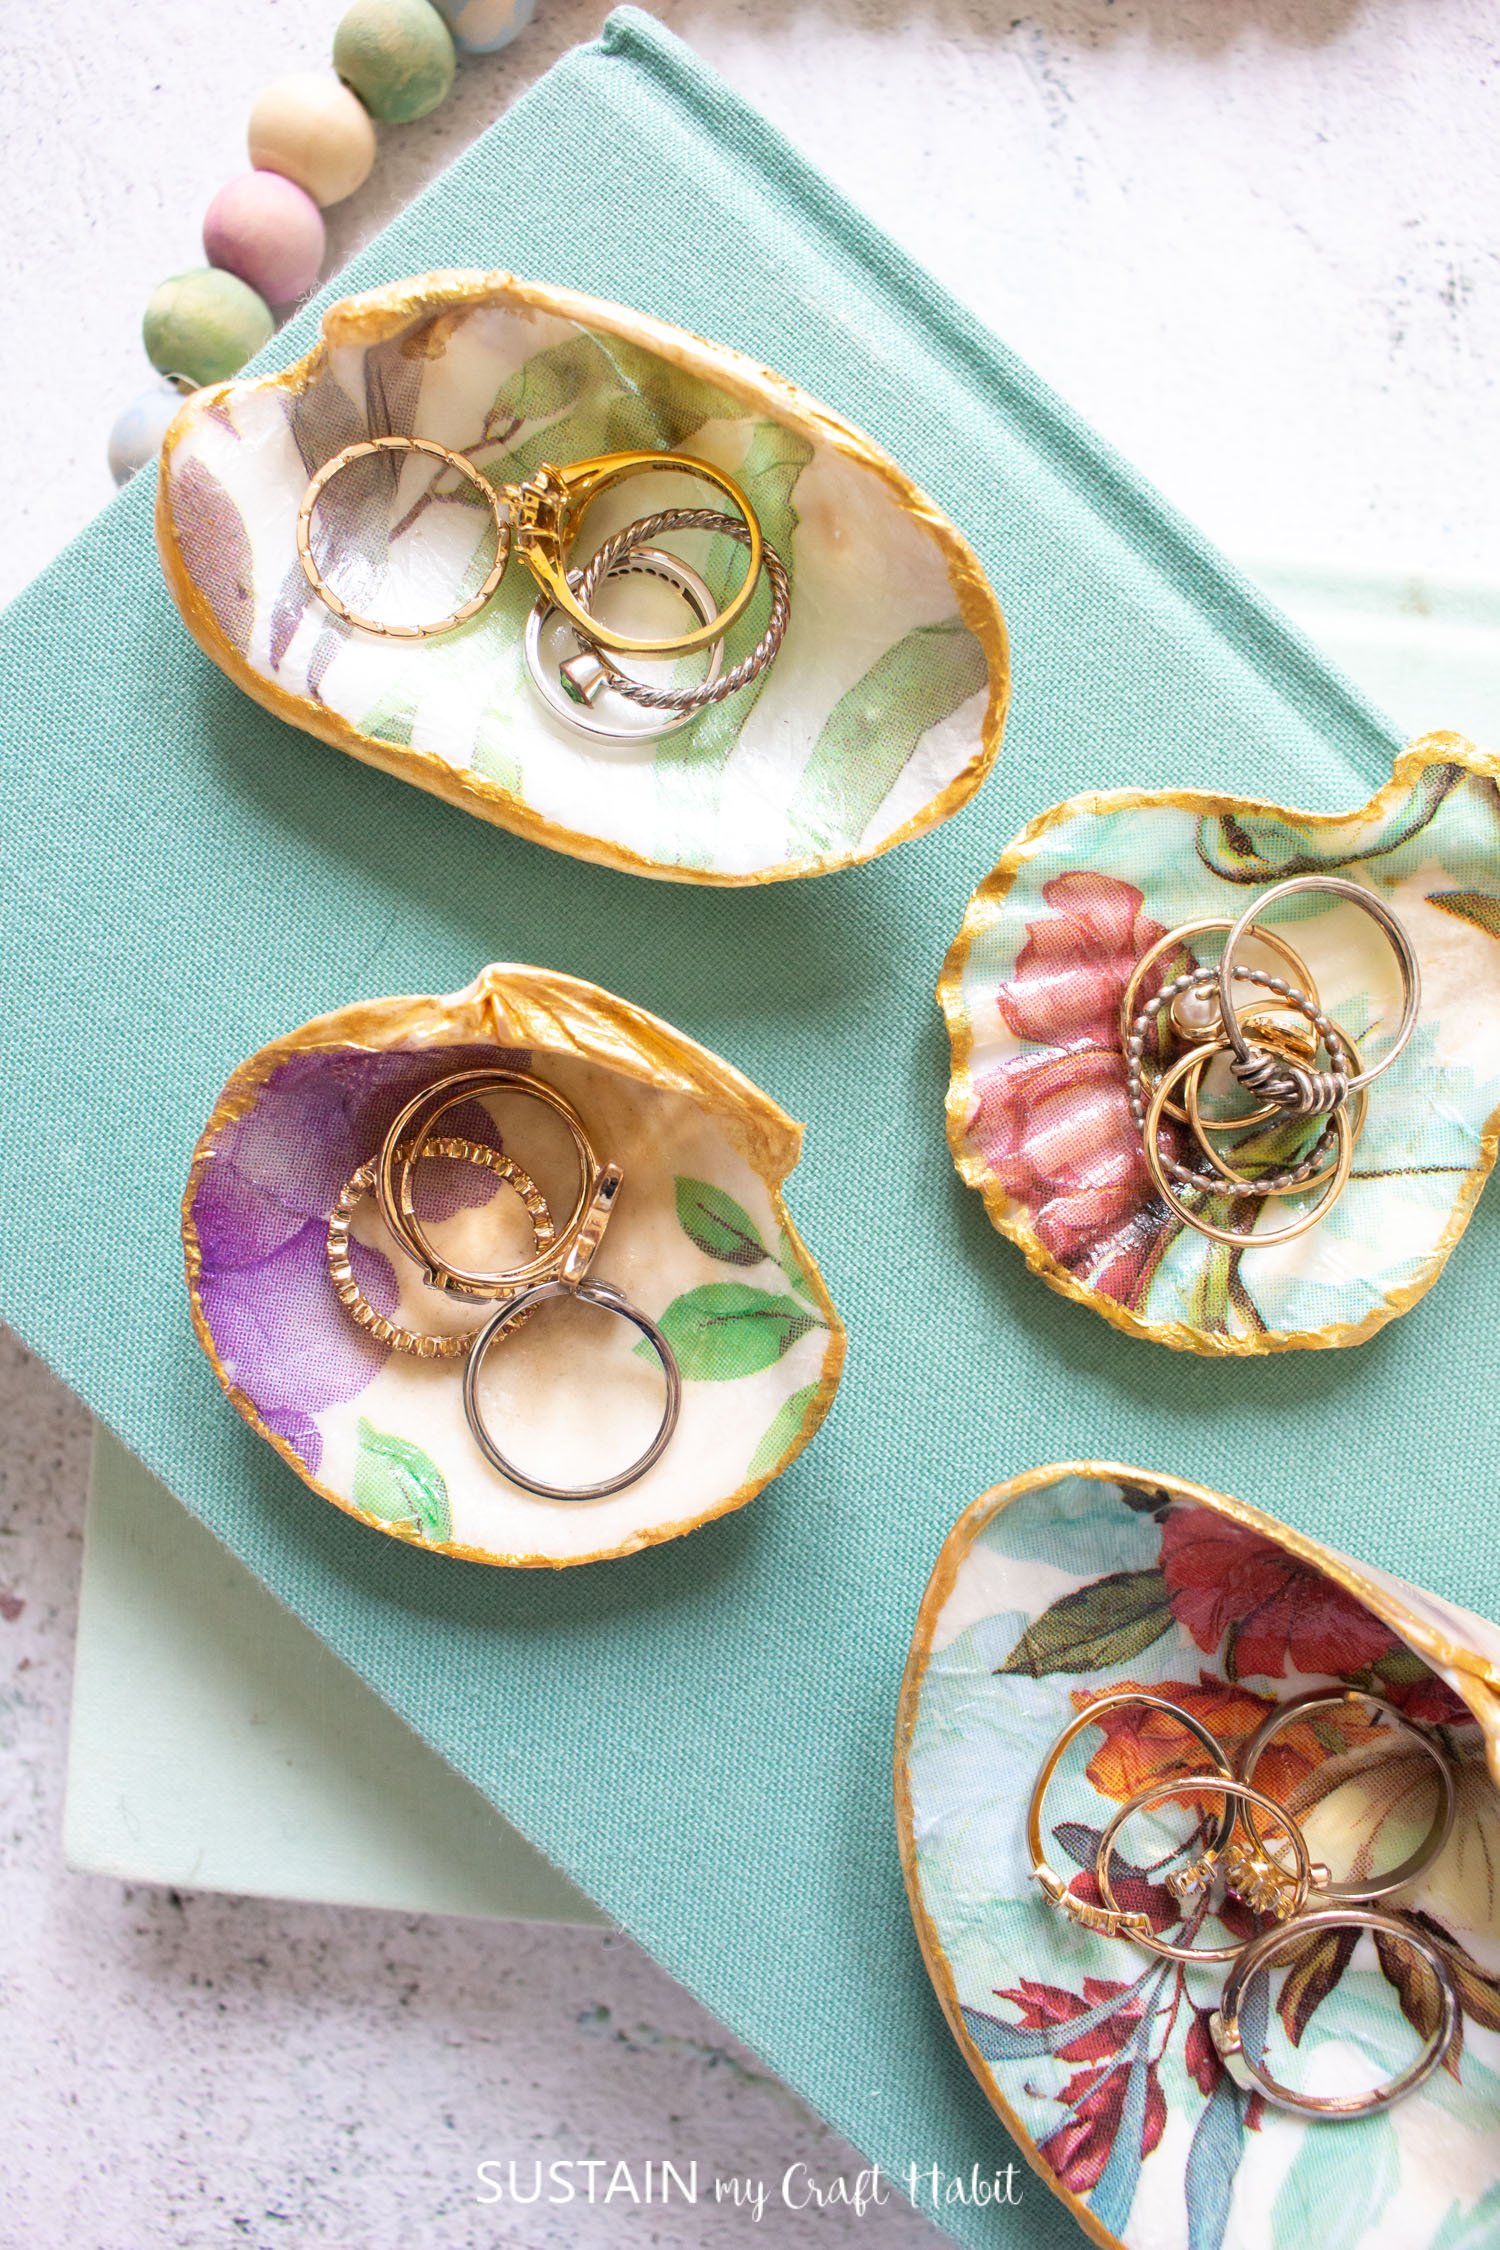 Trinket dishes made with seashells and Mod Podge holding jewellery.